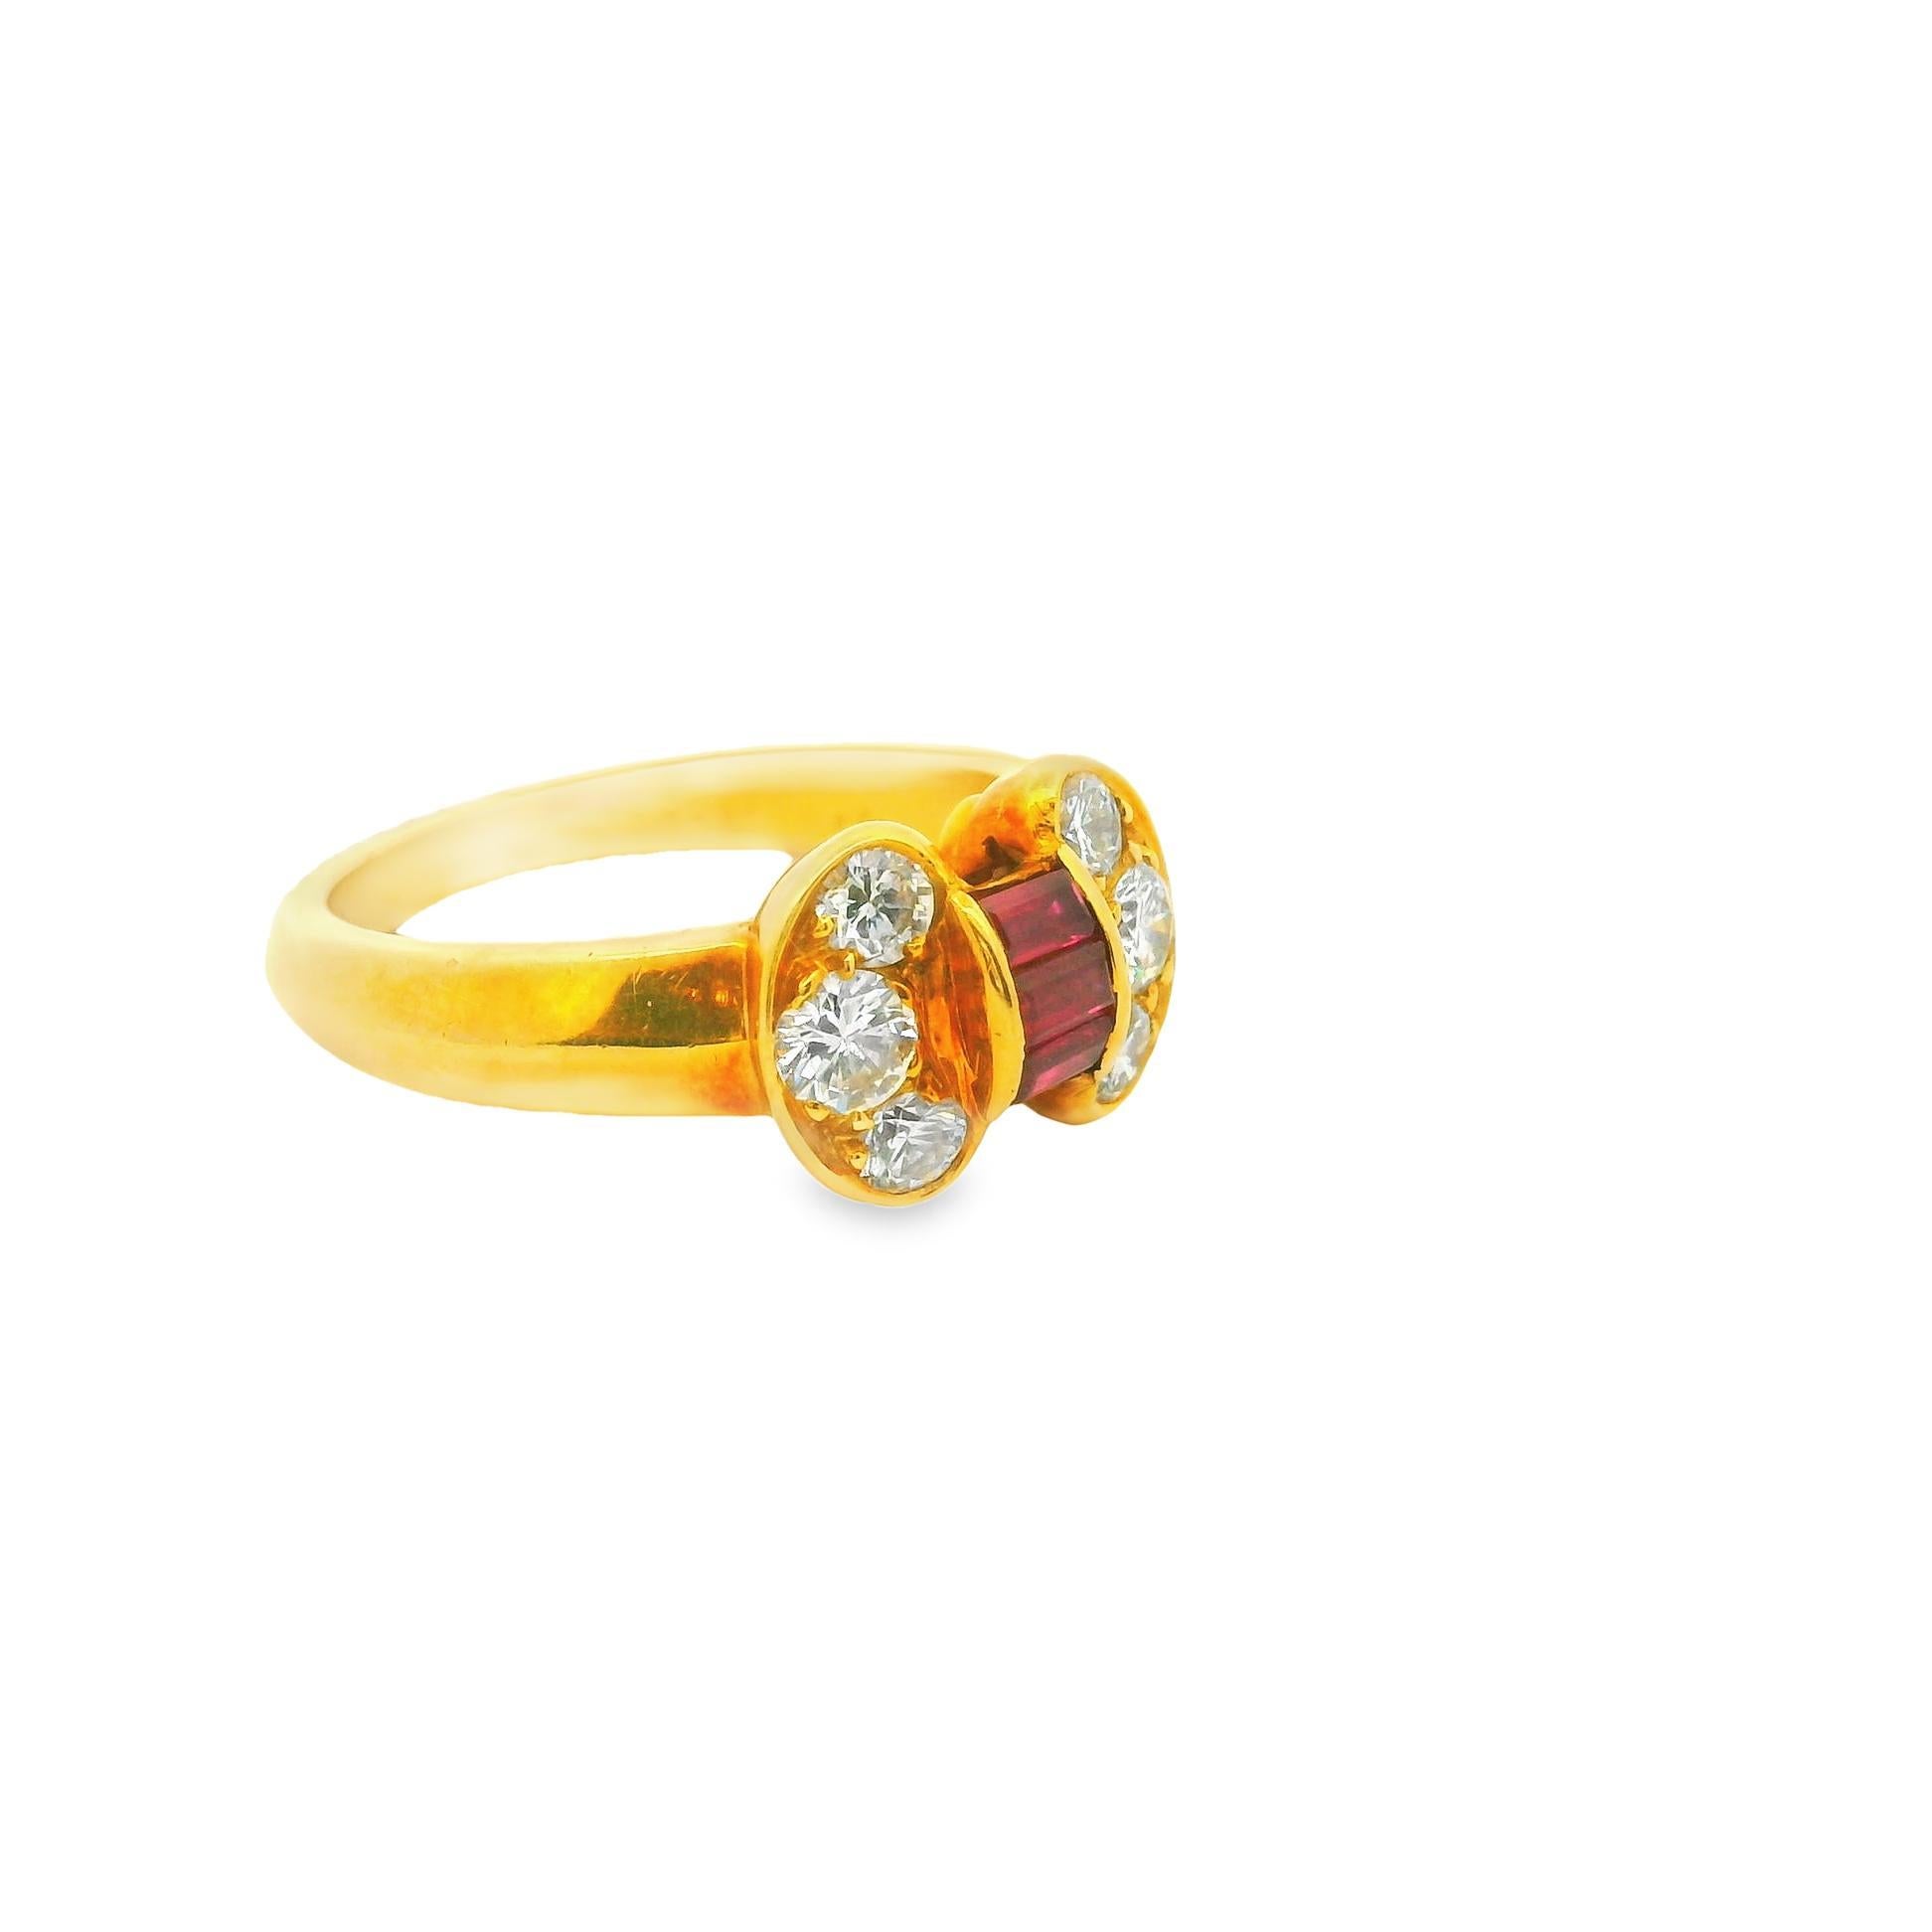 This beautiful ring was designed as a ribbon by Van Cleef & Arpels. It is part of their Celestial collection wherein three baguette rubies are in center while six brilliant round brilliant-cut diamonds are attached in both sides. Made in 18k yellow